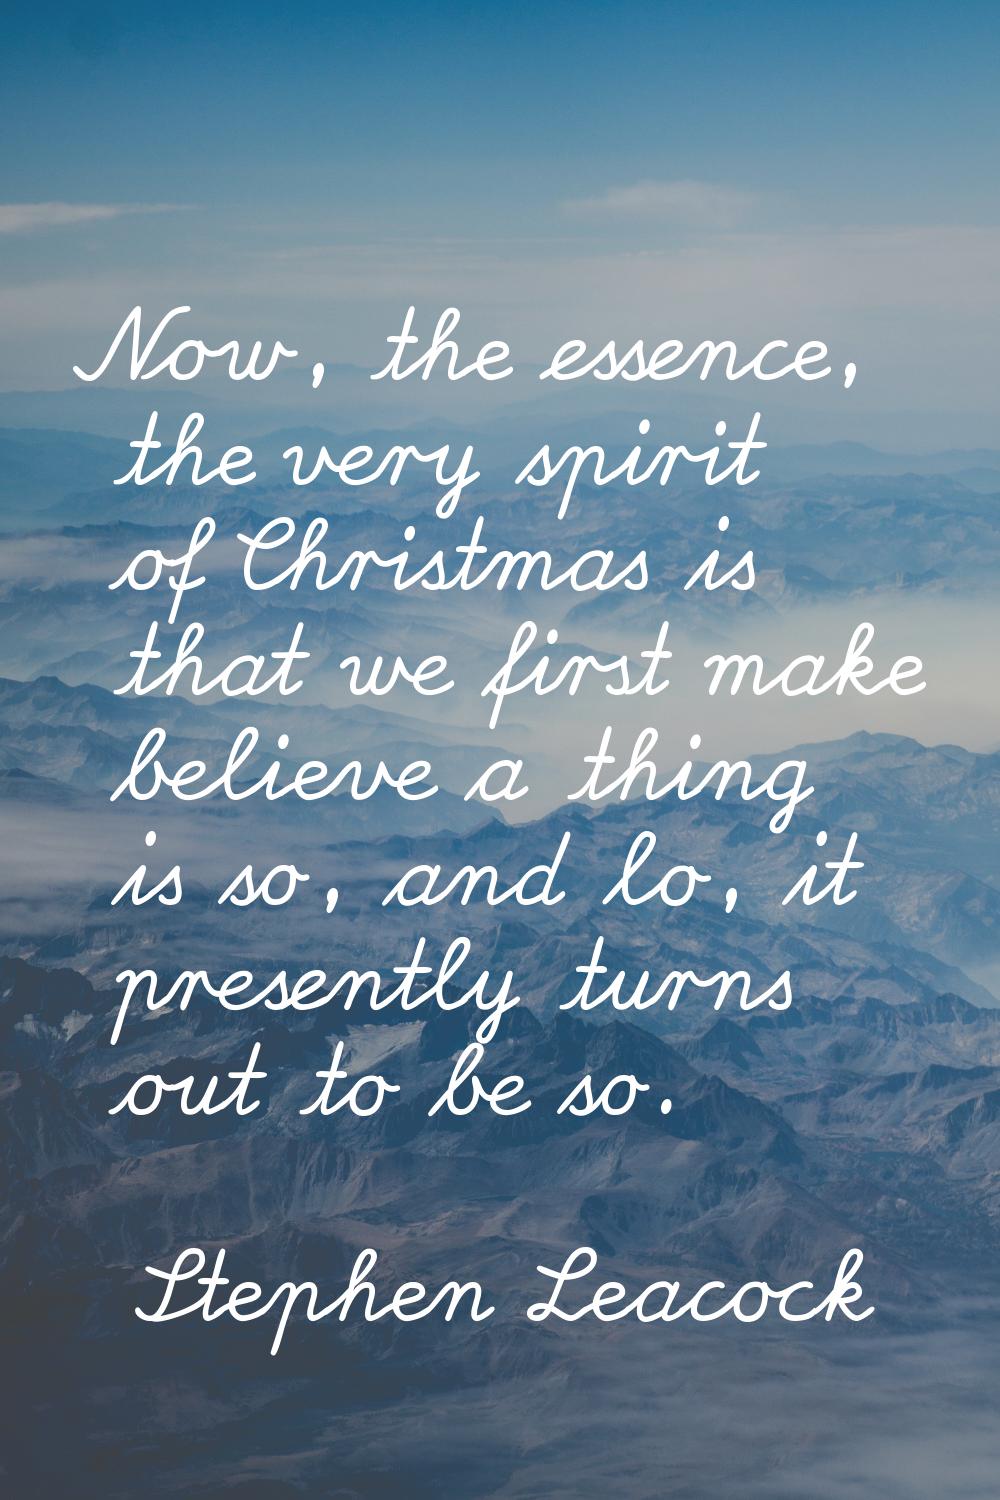 Now, the essence, the very spirit of Christmas is that we first make believe a thing is so, and lo,